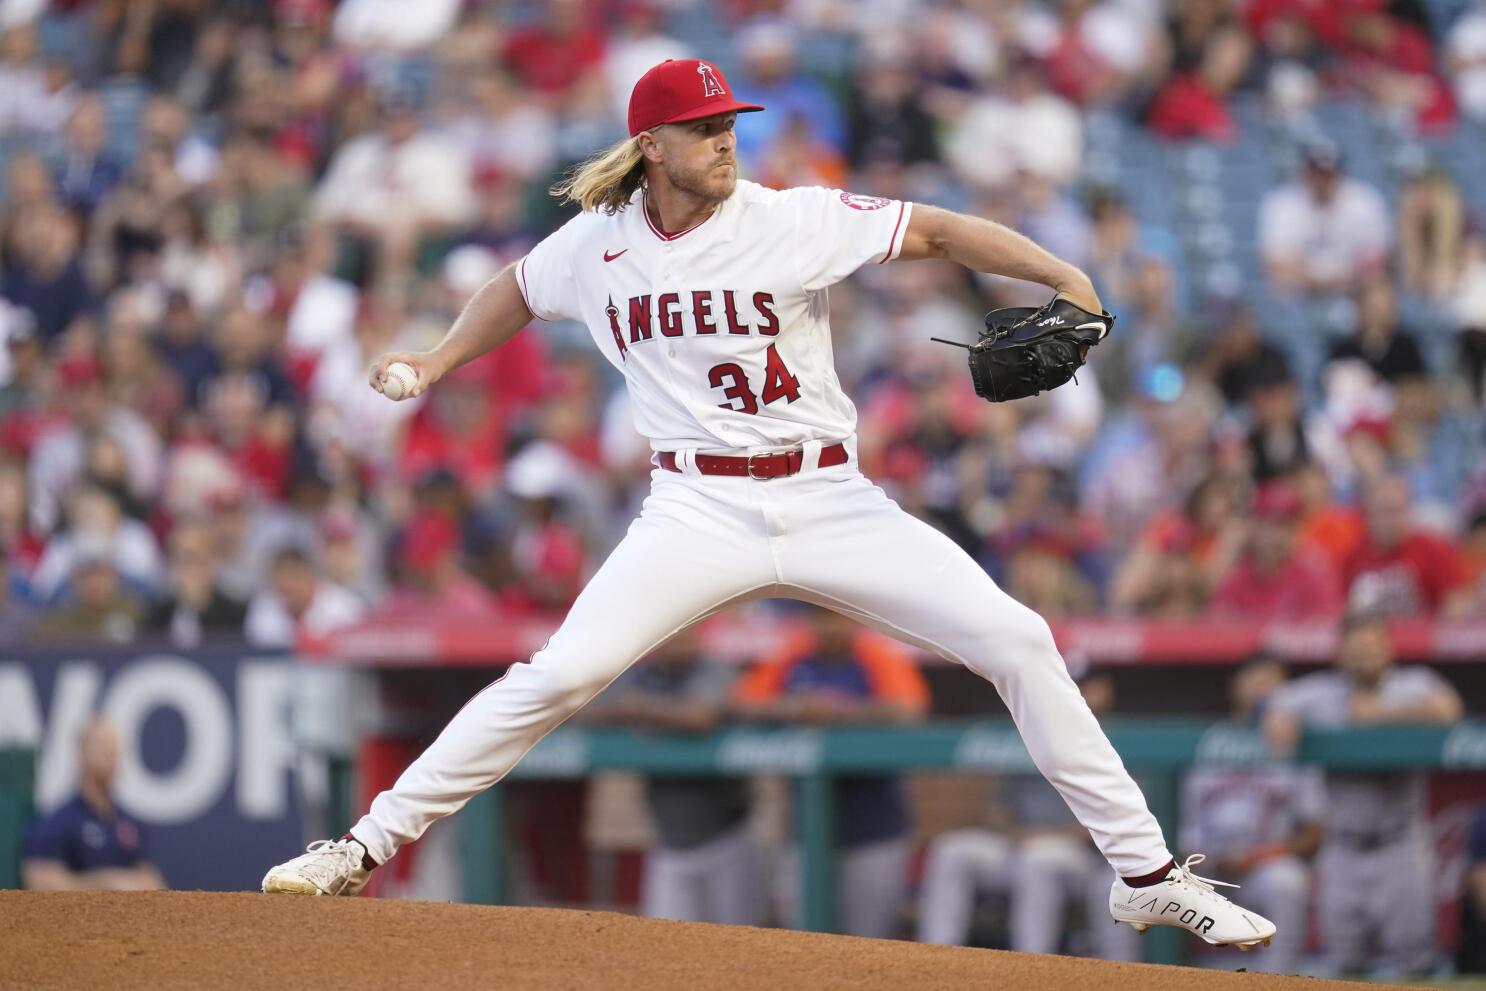 Noah Syndergaard to wear No. 34 jersey with Angels